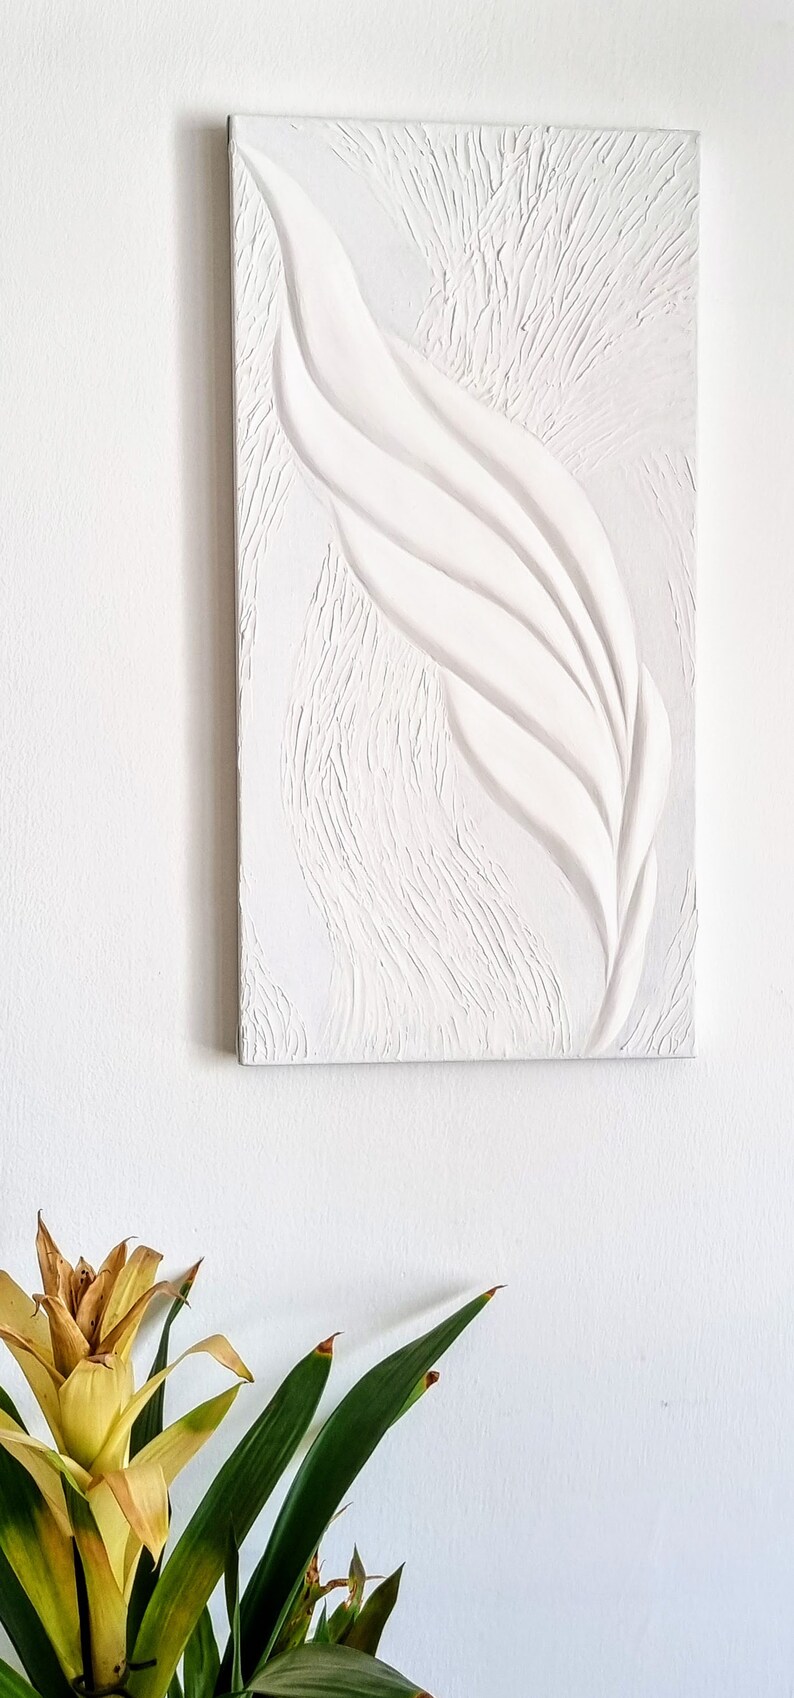 Minimalist White Feather Plaster Wall Decoration, 3D Wall Art For Midcentury Modern Decor, Abstract Feather Art Bas Relief image 2